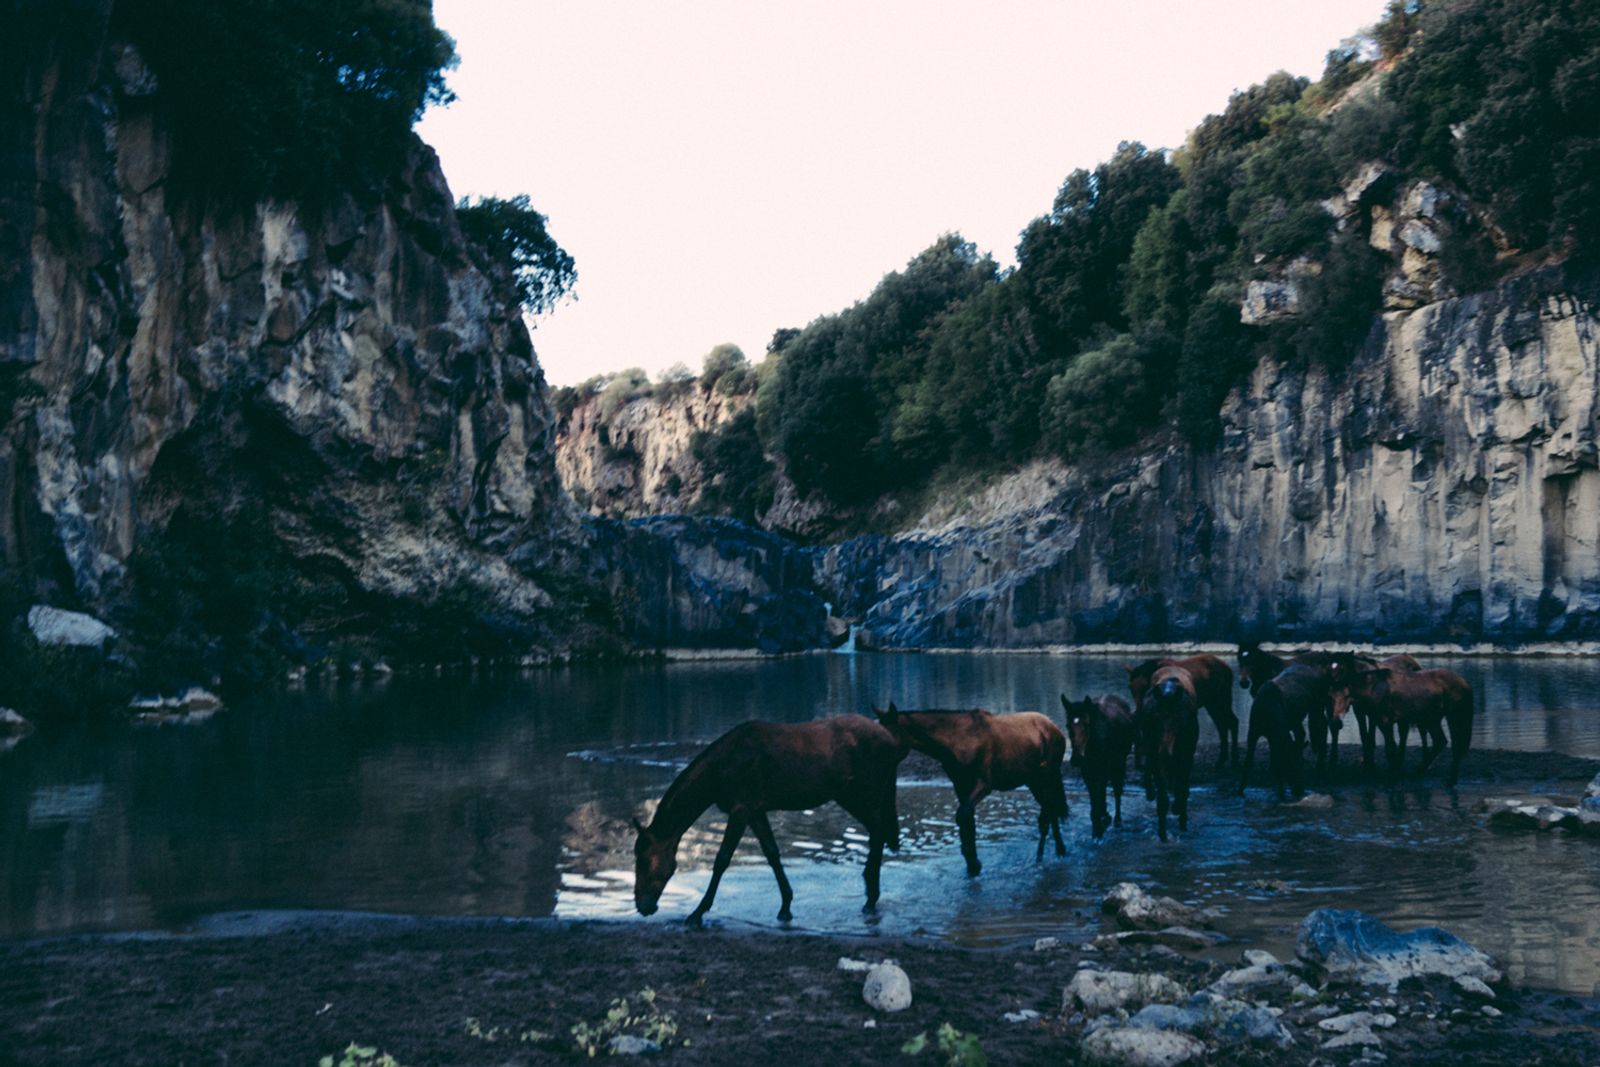 © Francesca Todde - Image from the TransHumance photography project